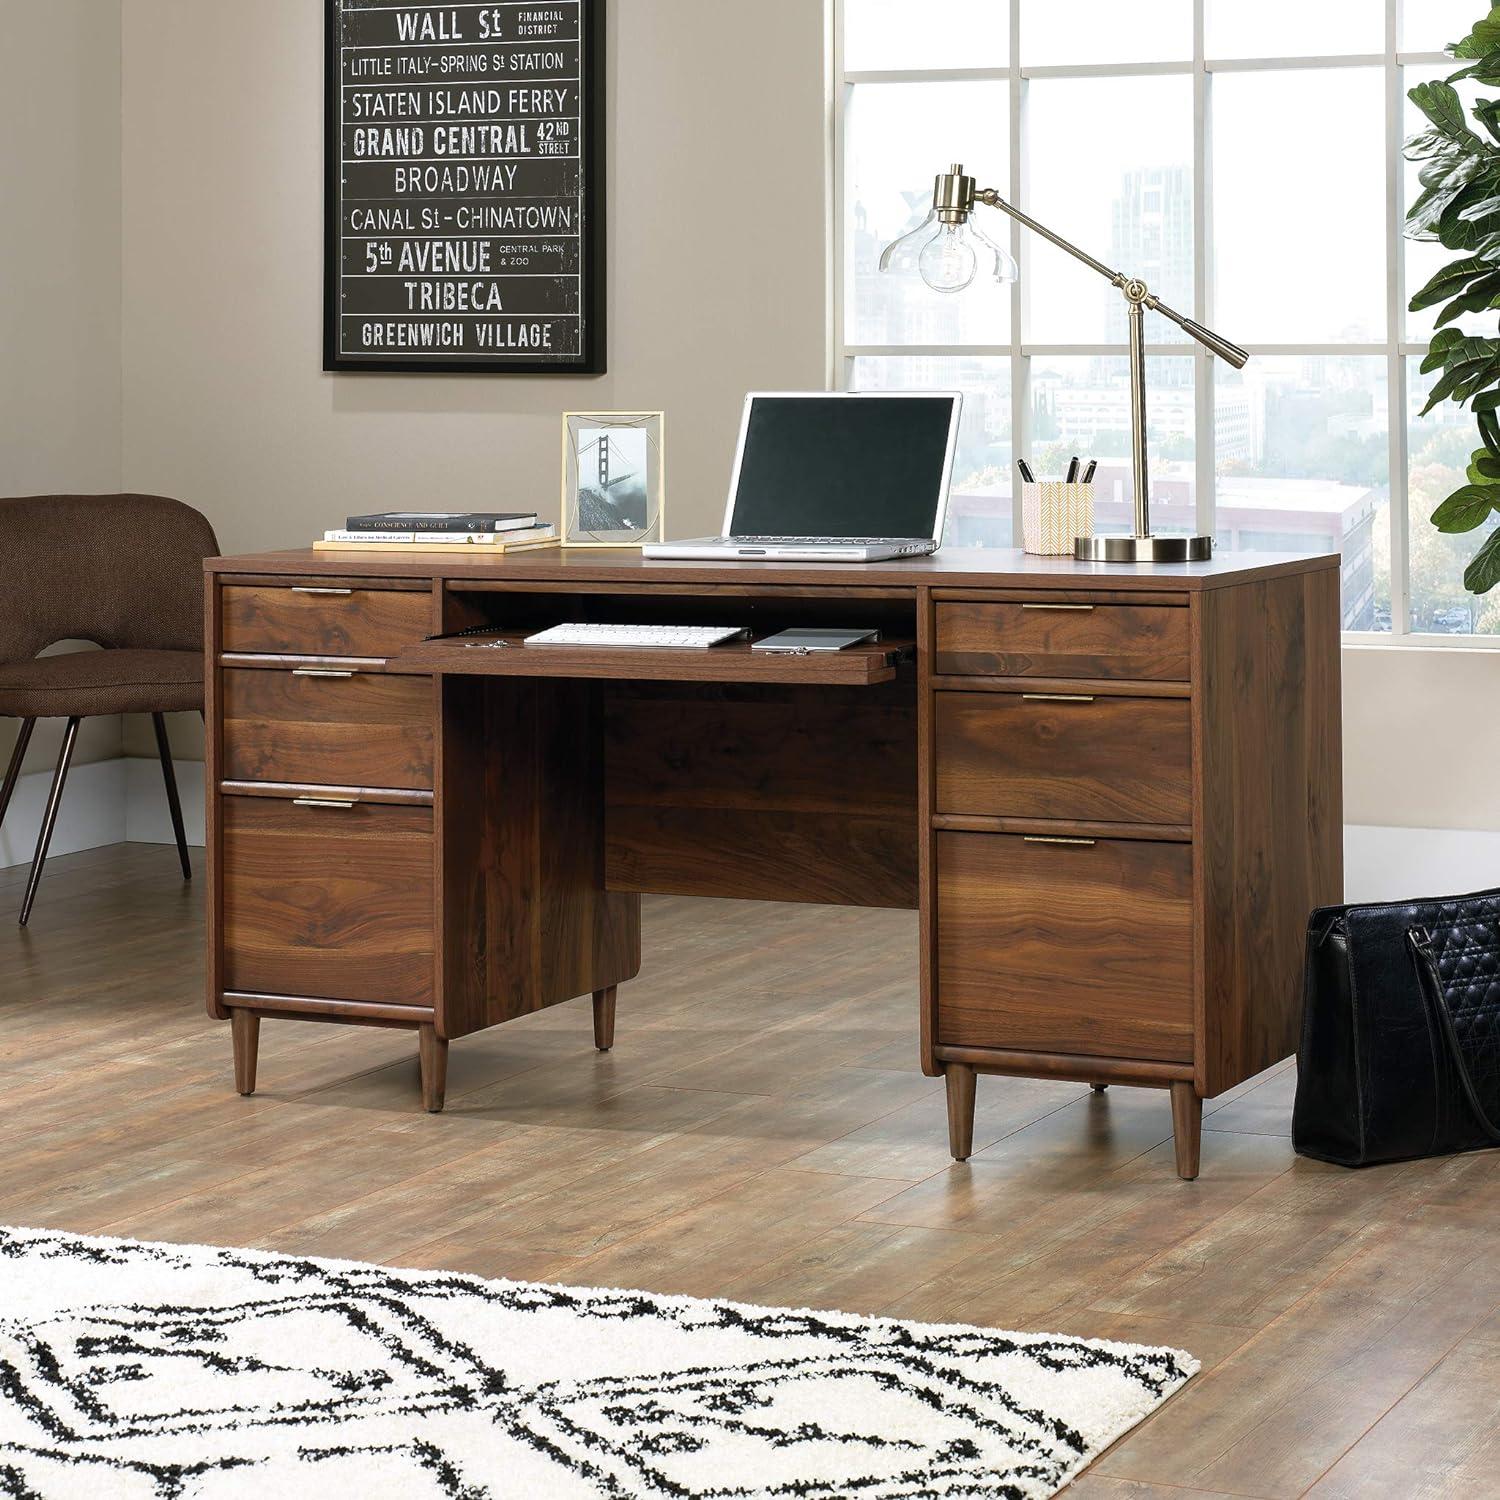 Grand Walnut Executive Desk with Keyboard Tray and Filing Cabinet